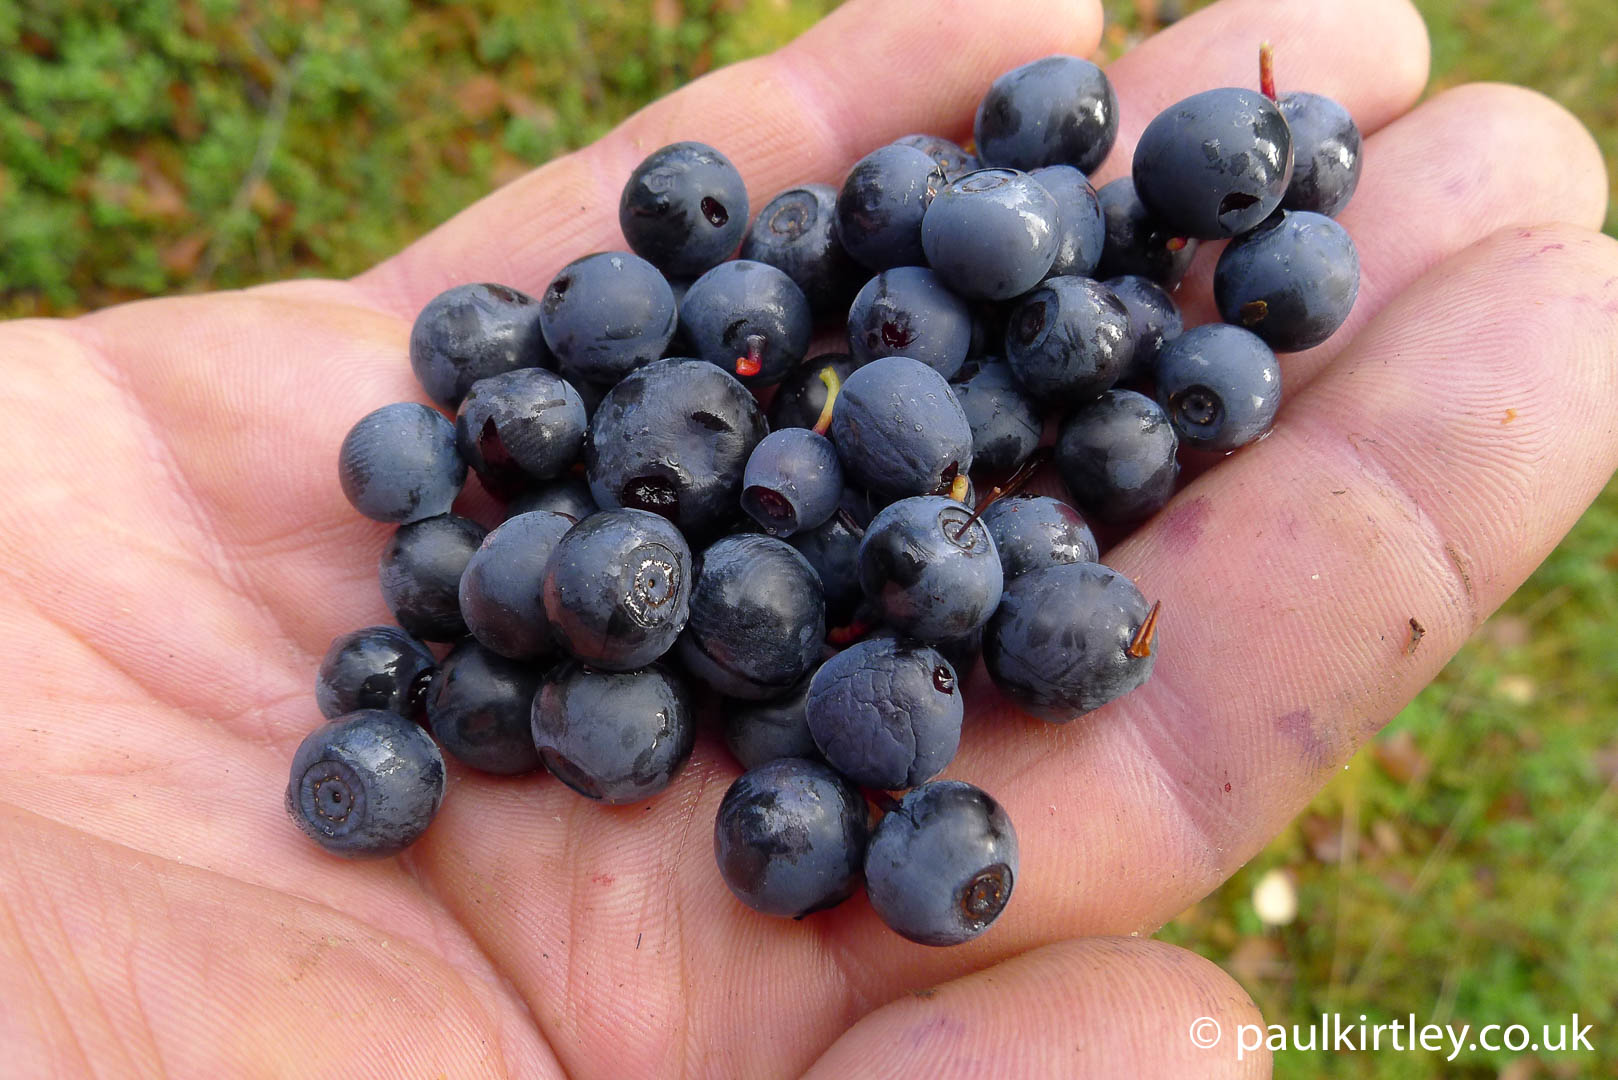 Bilberries - one of the best berries to forage